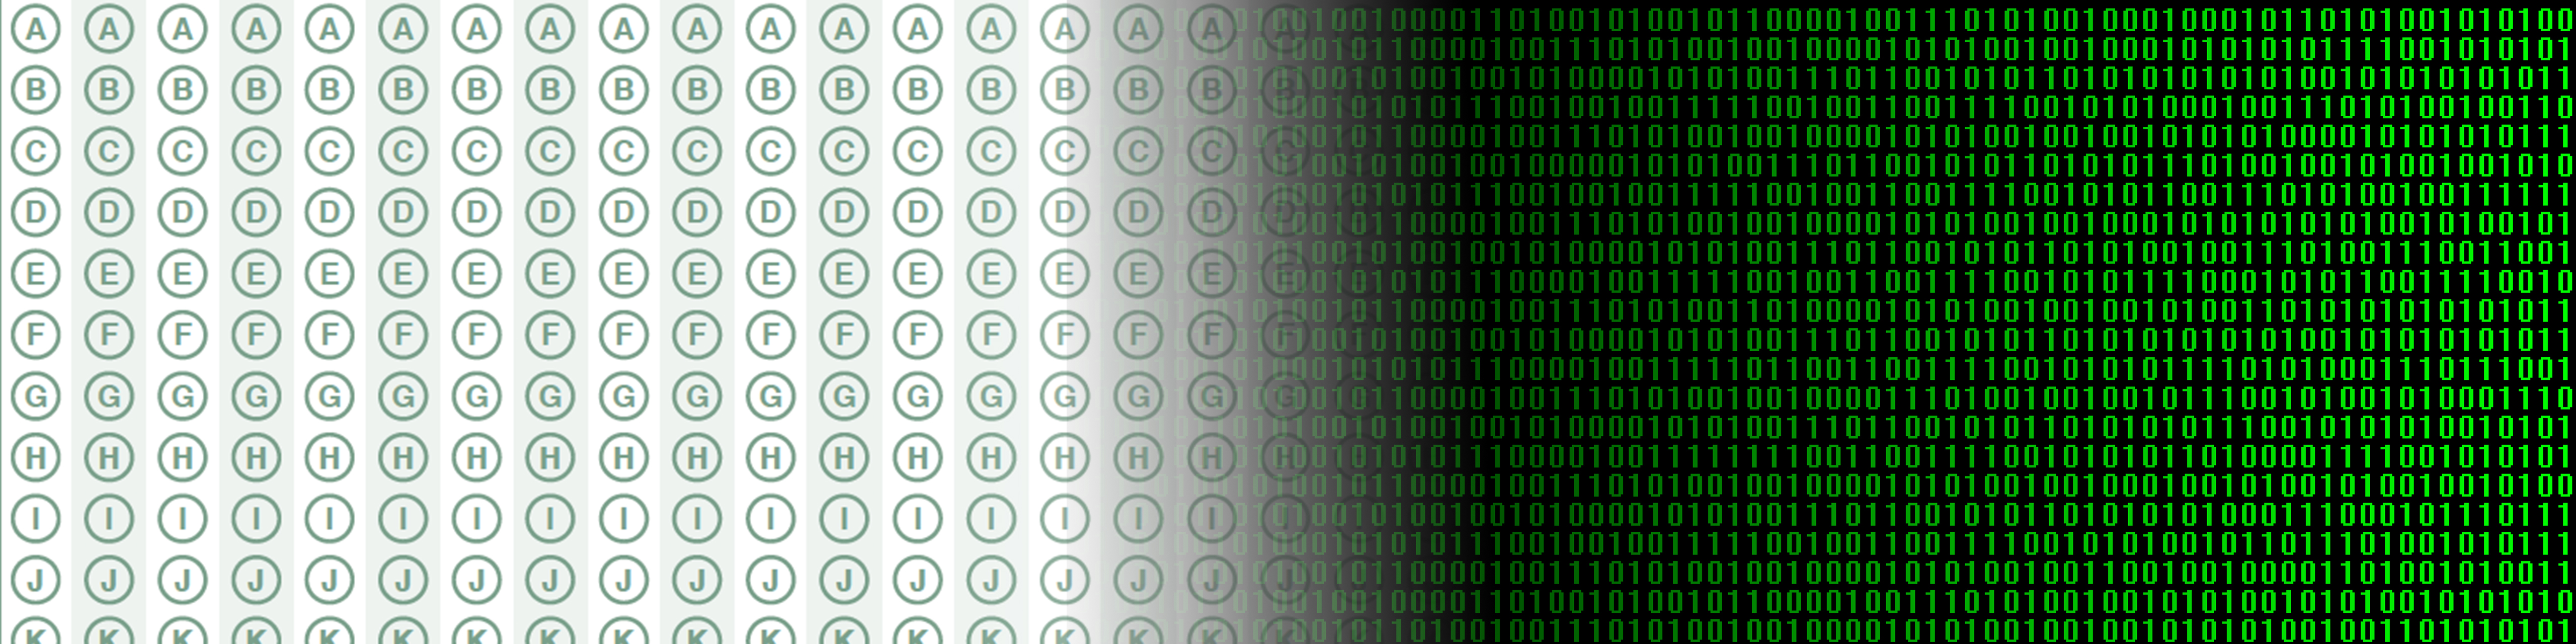 An illustration showing a bubble sheet, on the left, melting into lines of green computer code on the right